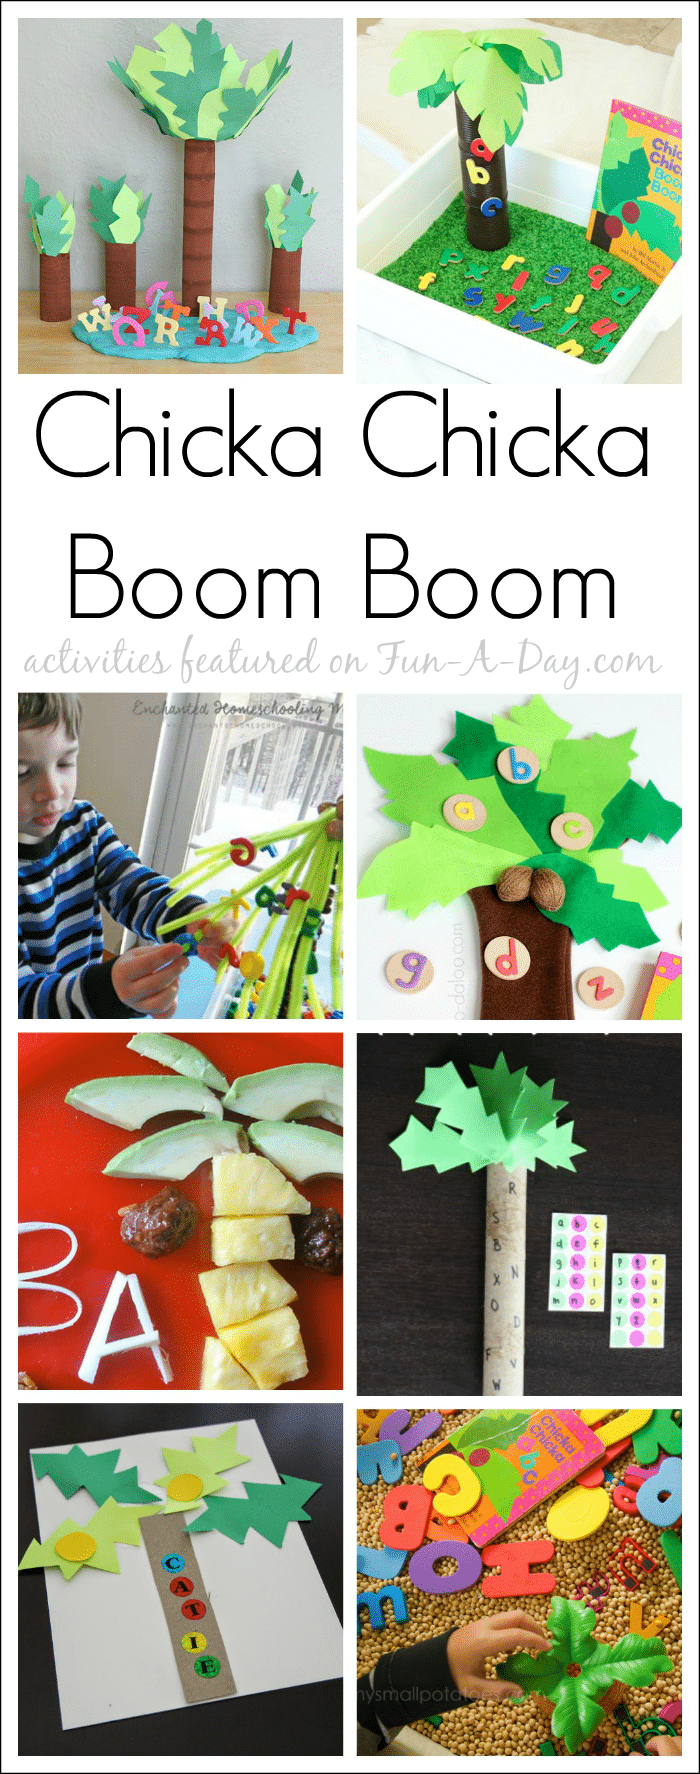 10 must-try Chicka Chicka Boom Boom activities!